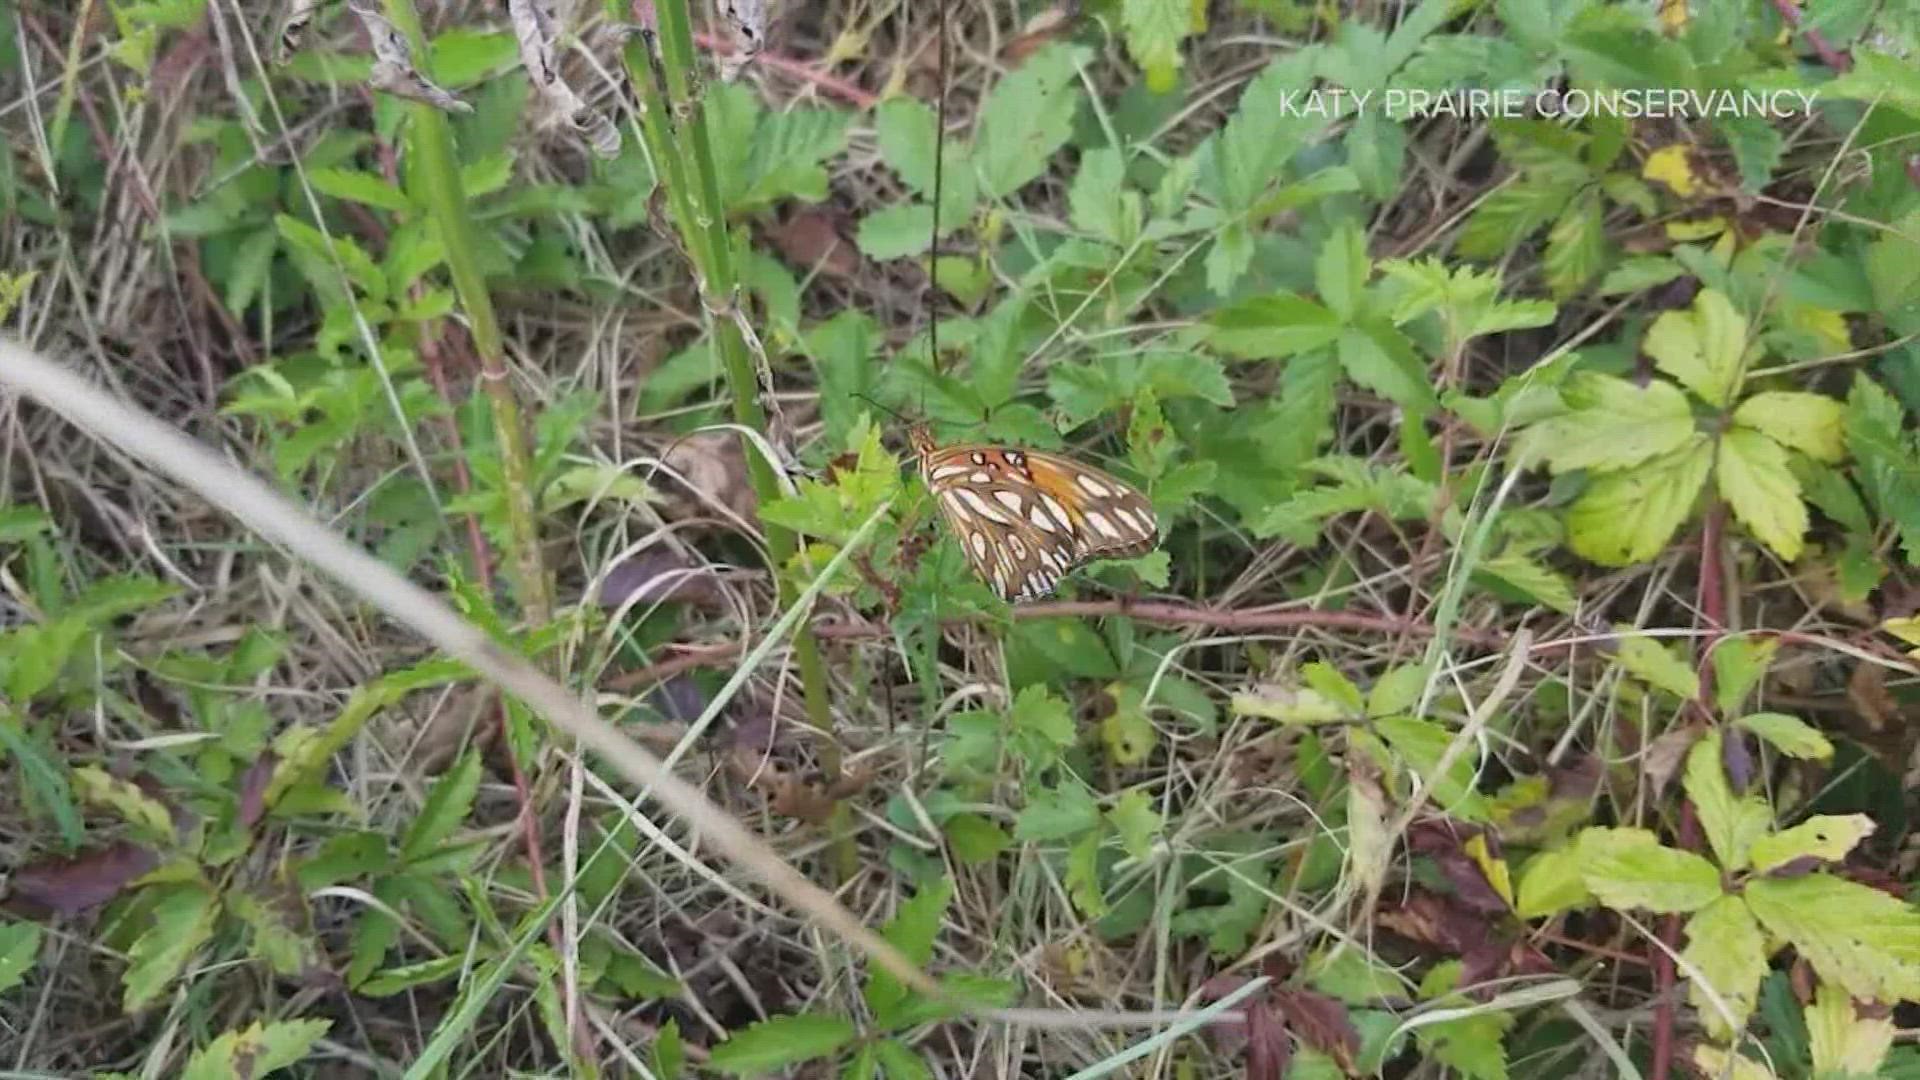 It's time to press pause and enjoy a Moment of Zen. this video is from the Katy Prairie Conservancy